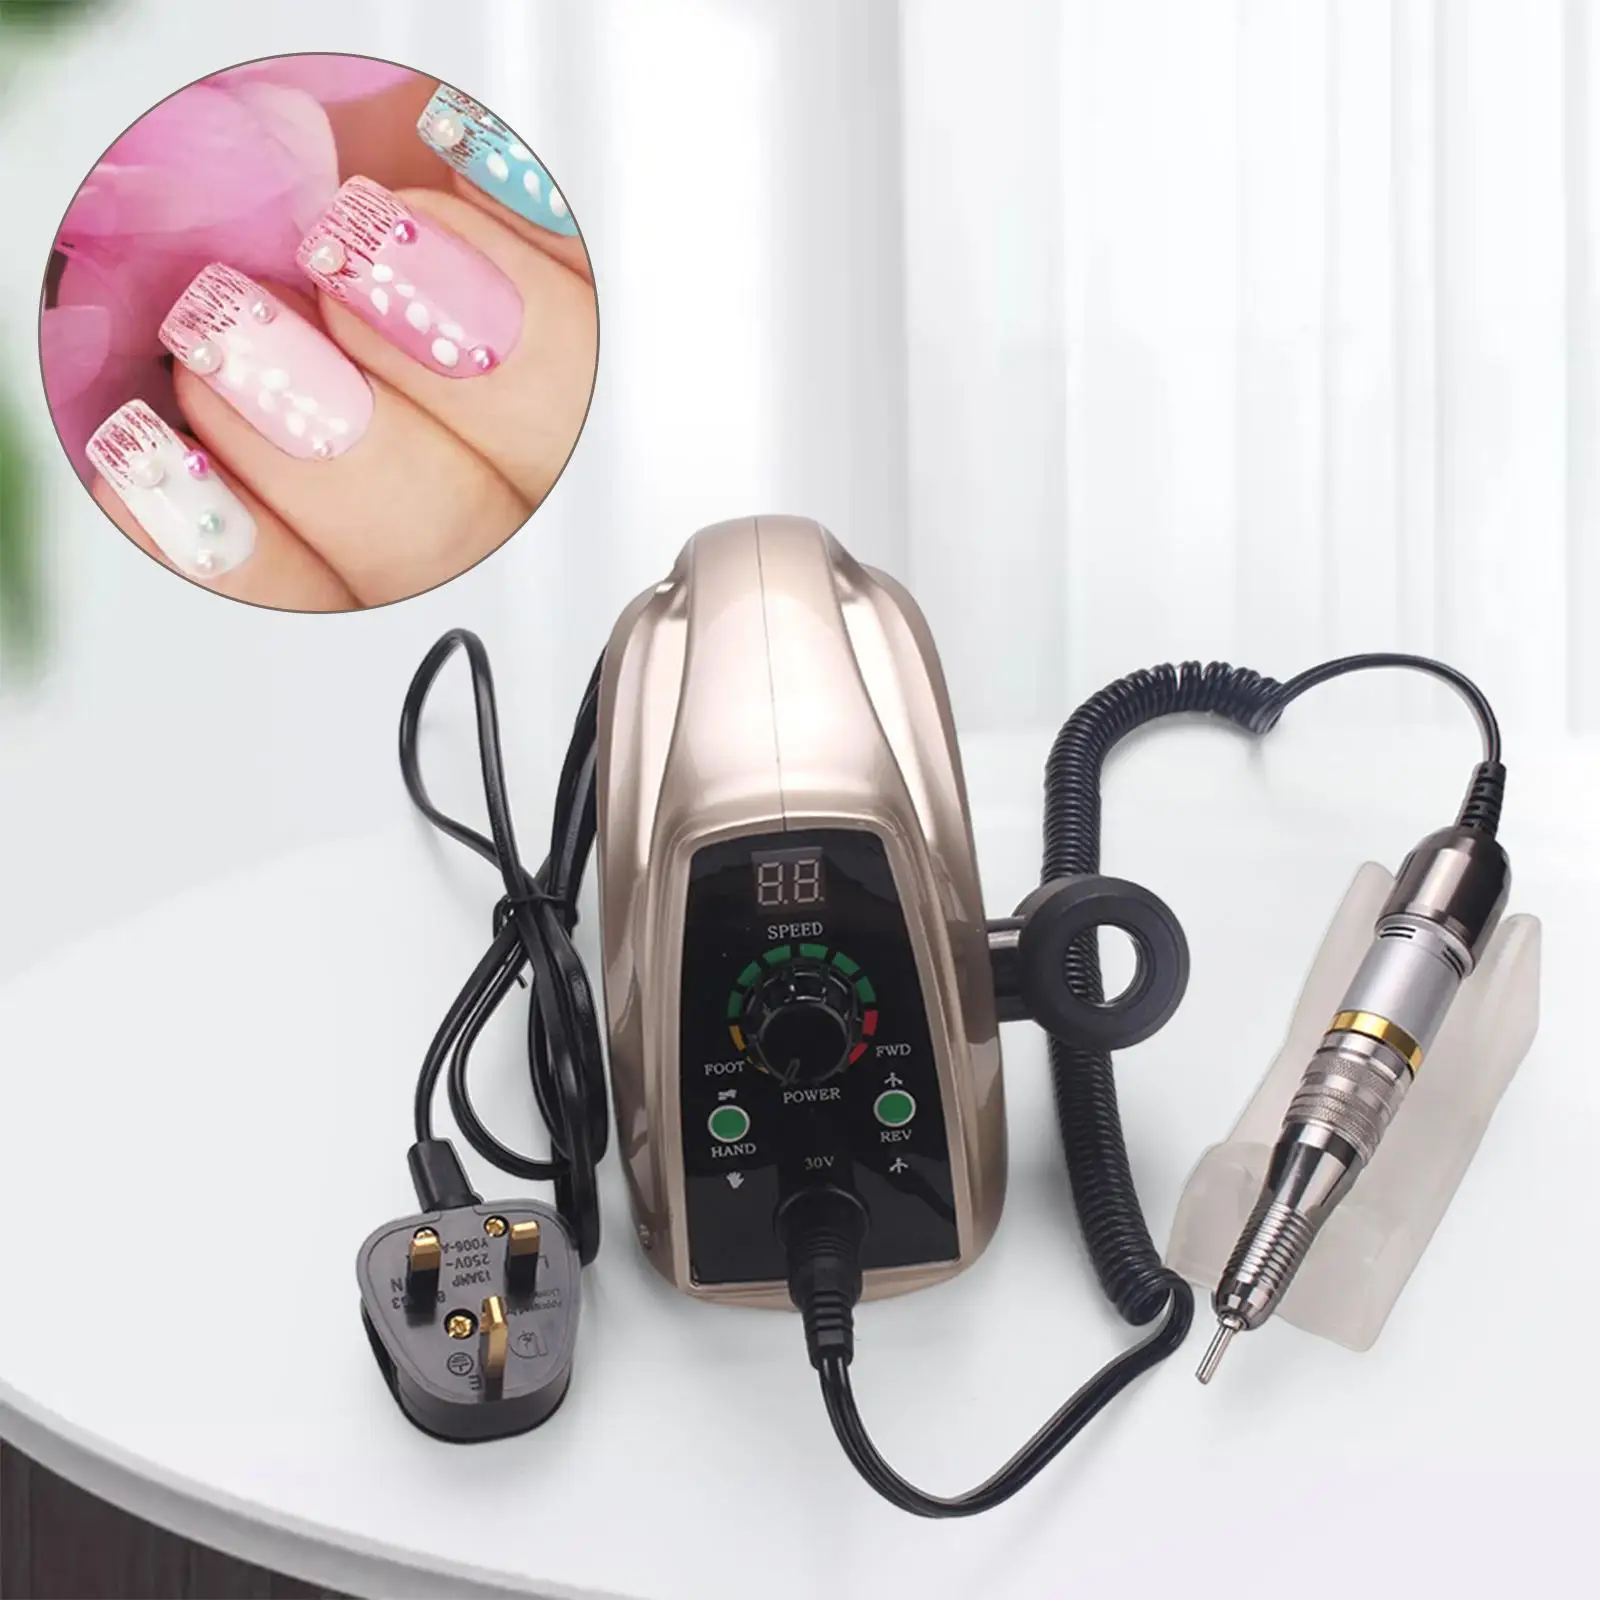 Professional Electric Nail Drill Machine 35000 RPM Portable Polishing File Handpiece for Buffing Gel Nail Nail Art Glazing UK